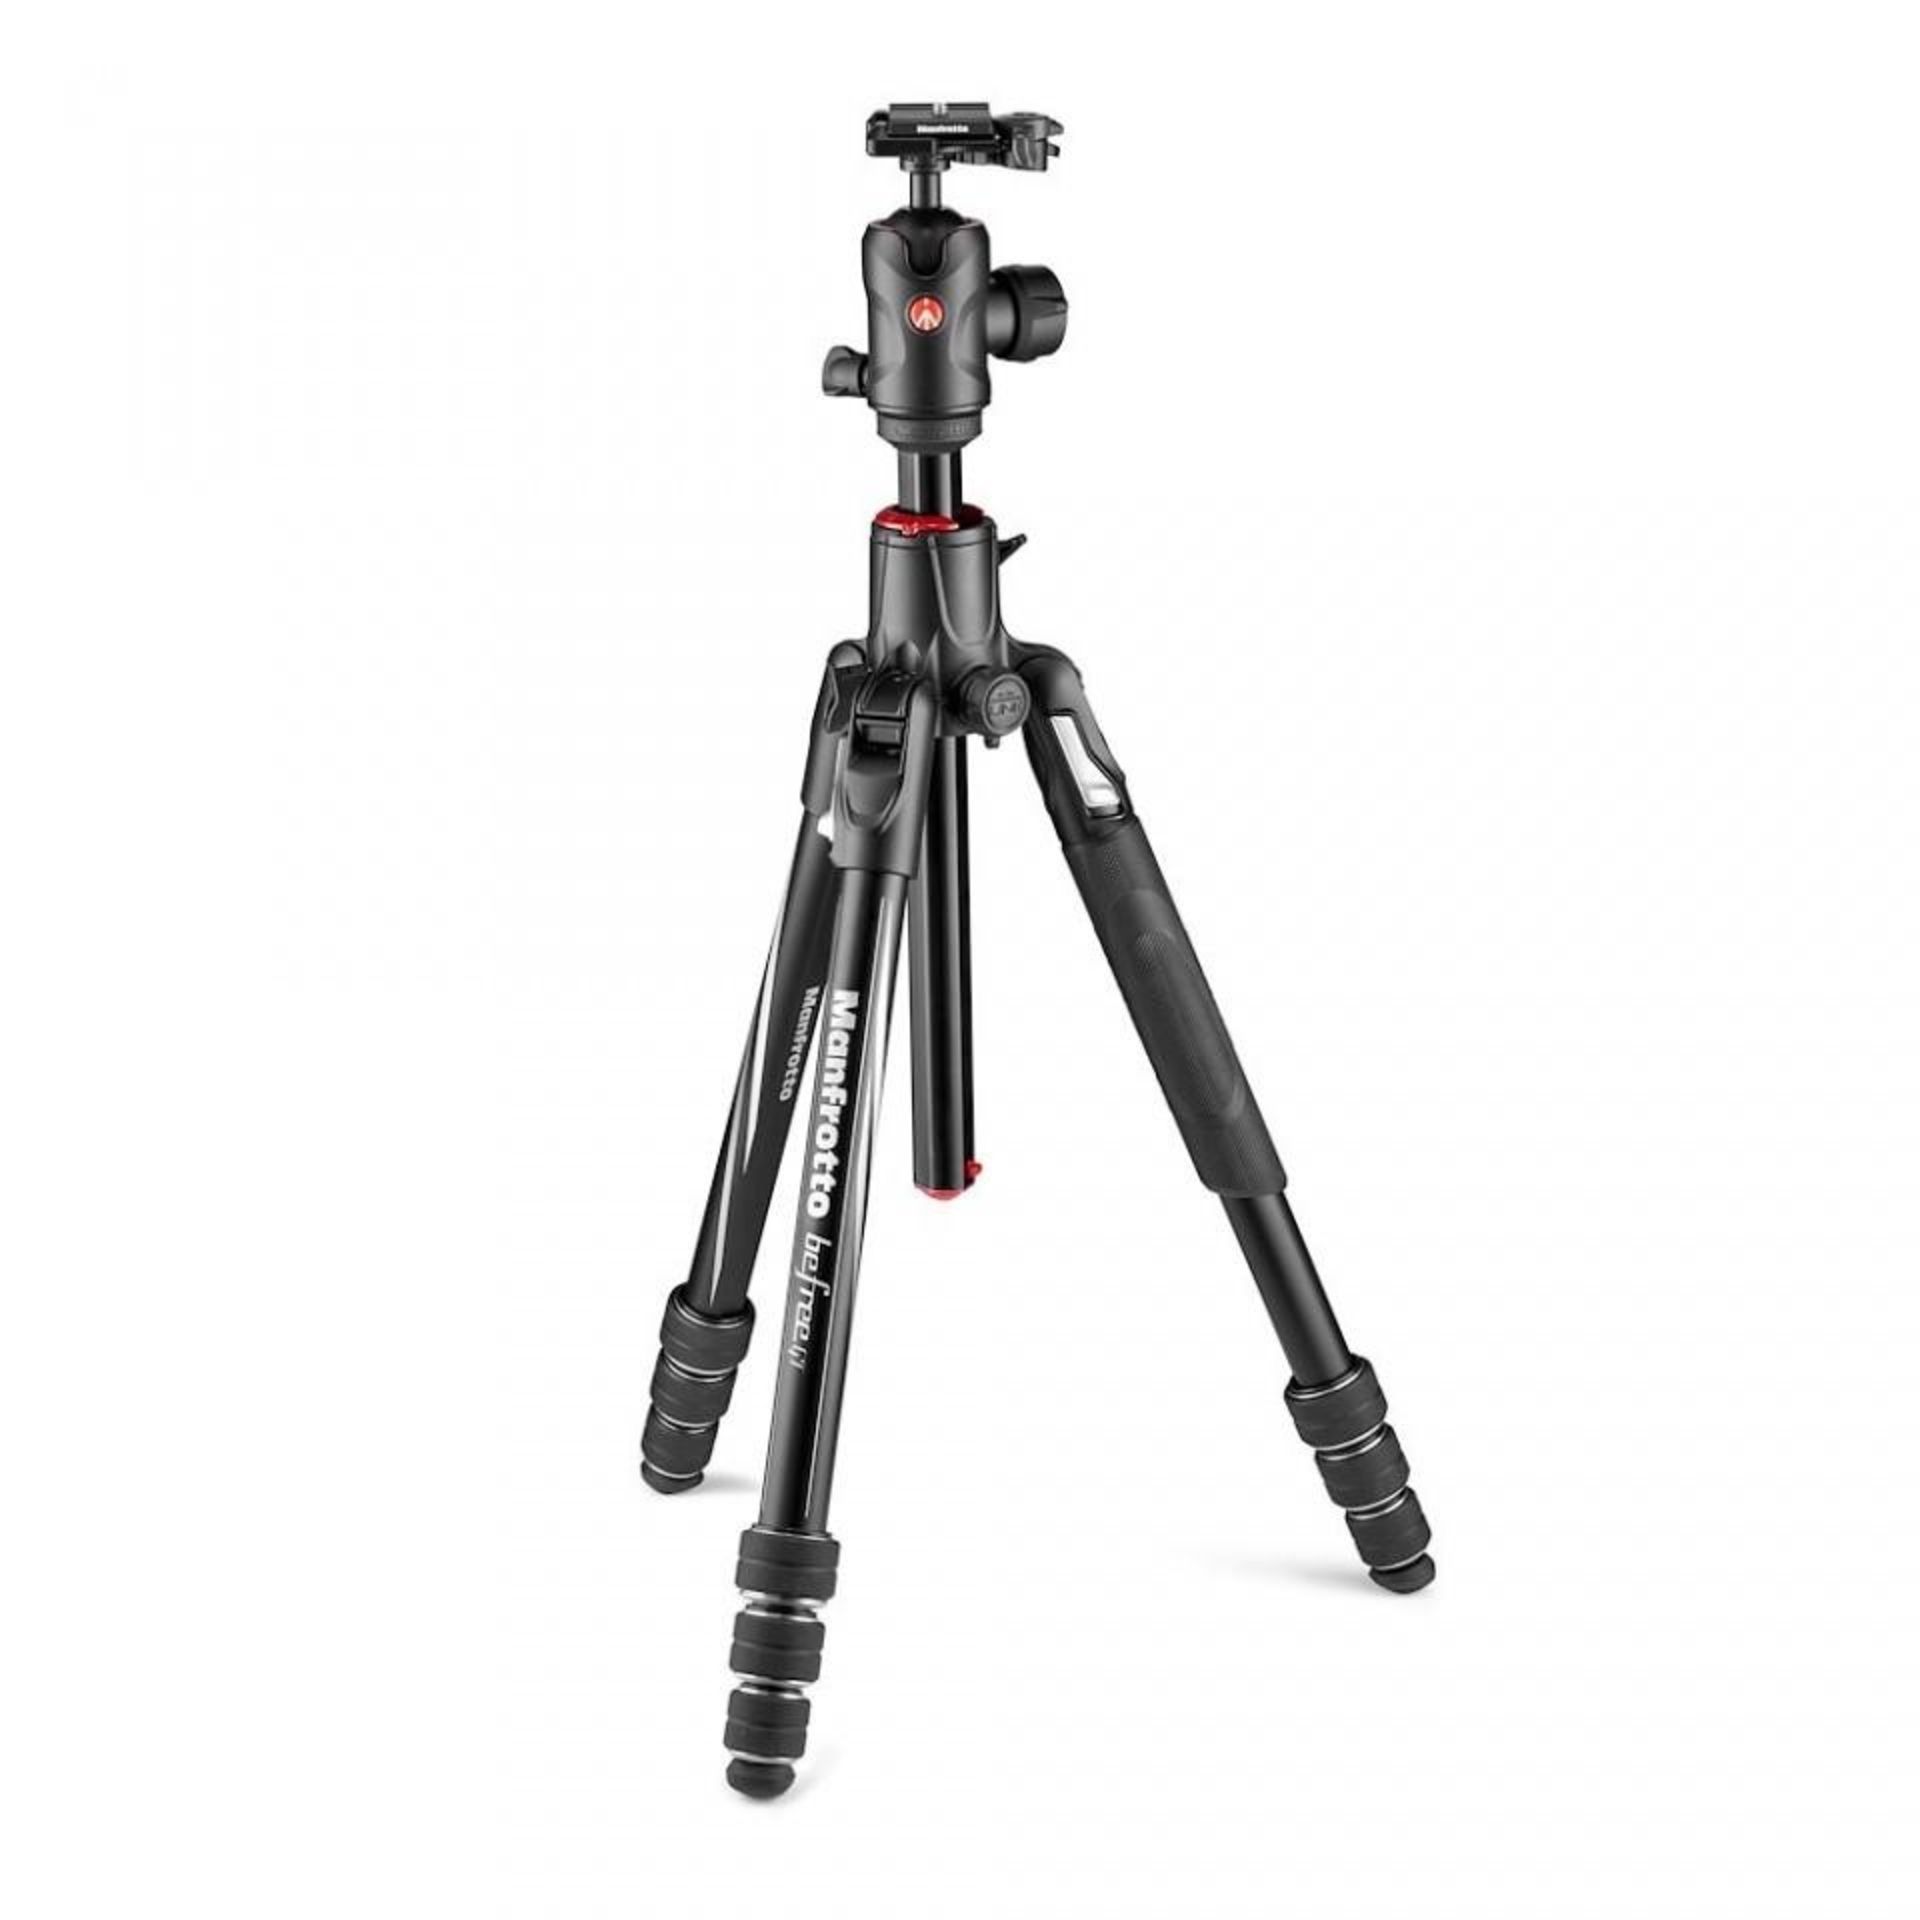 MANFROTTO BEFREE TRIPOD WITH GRIP HEAD